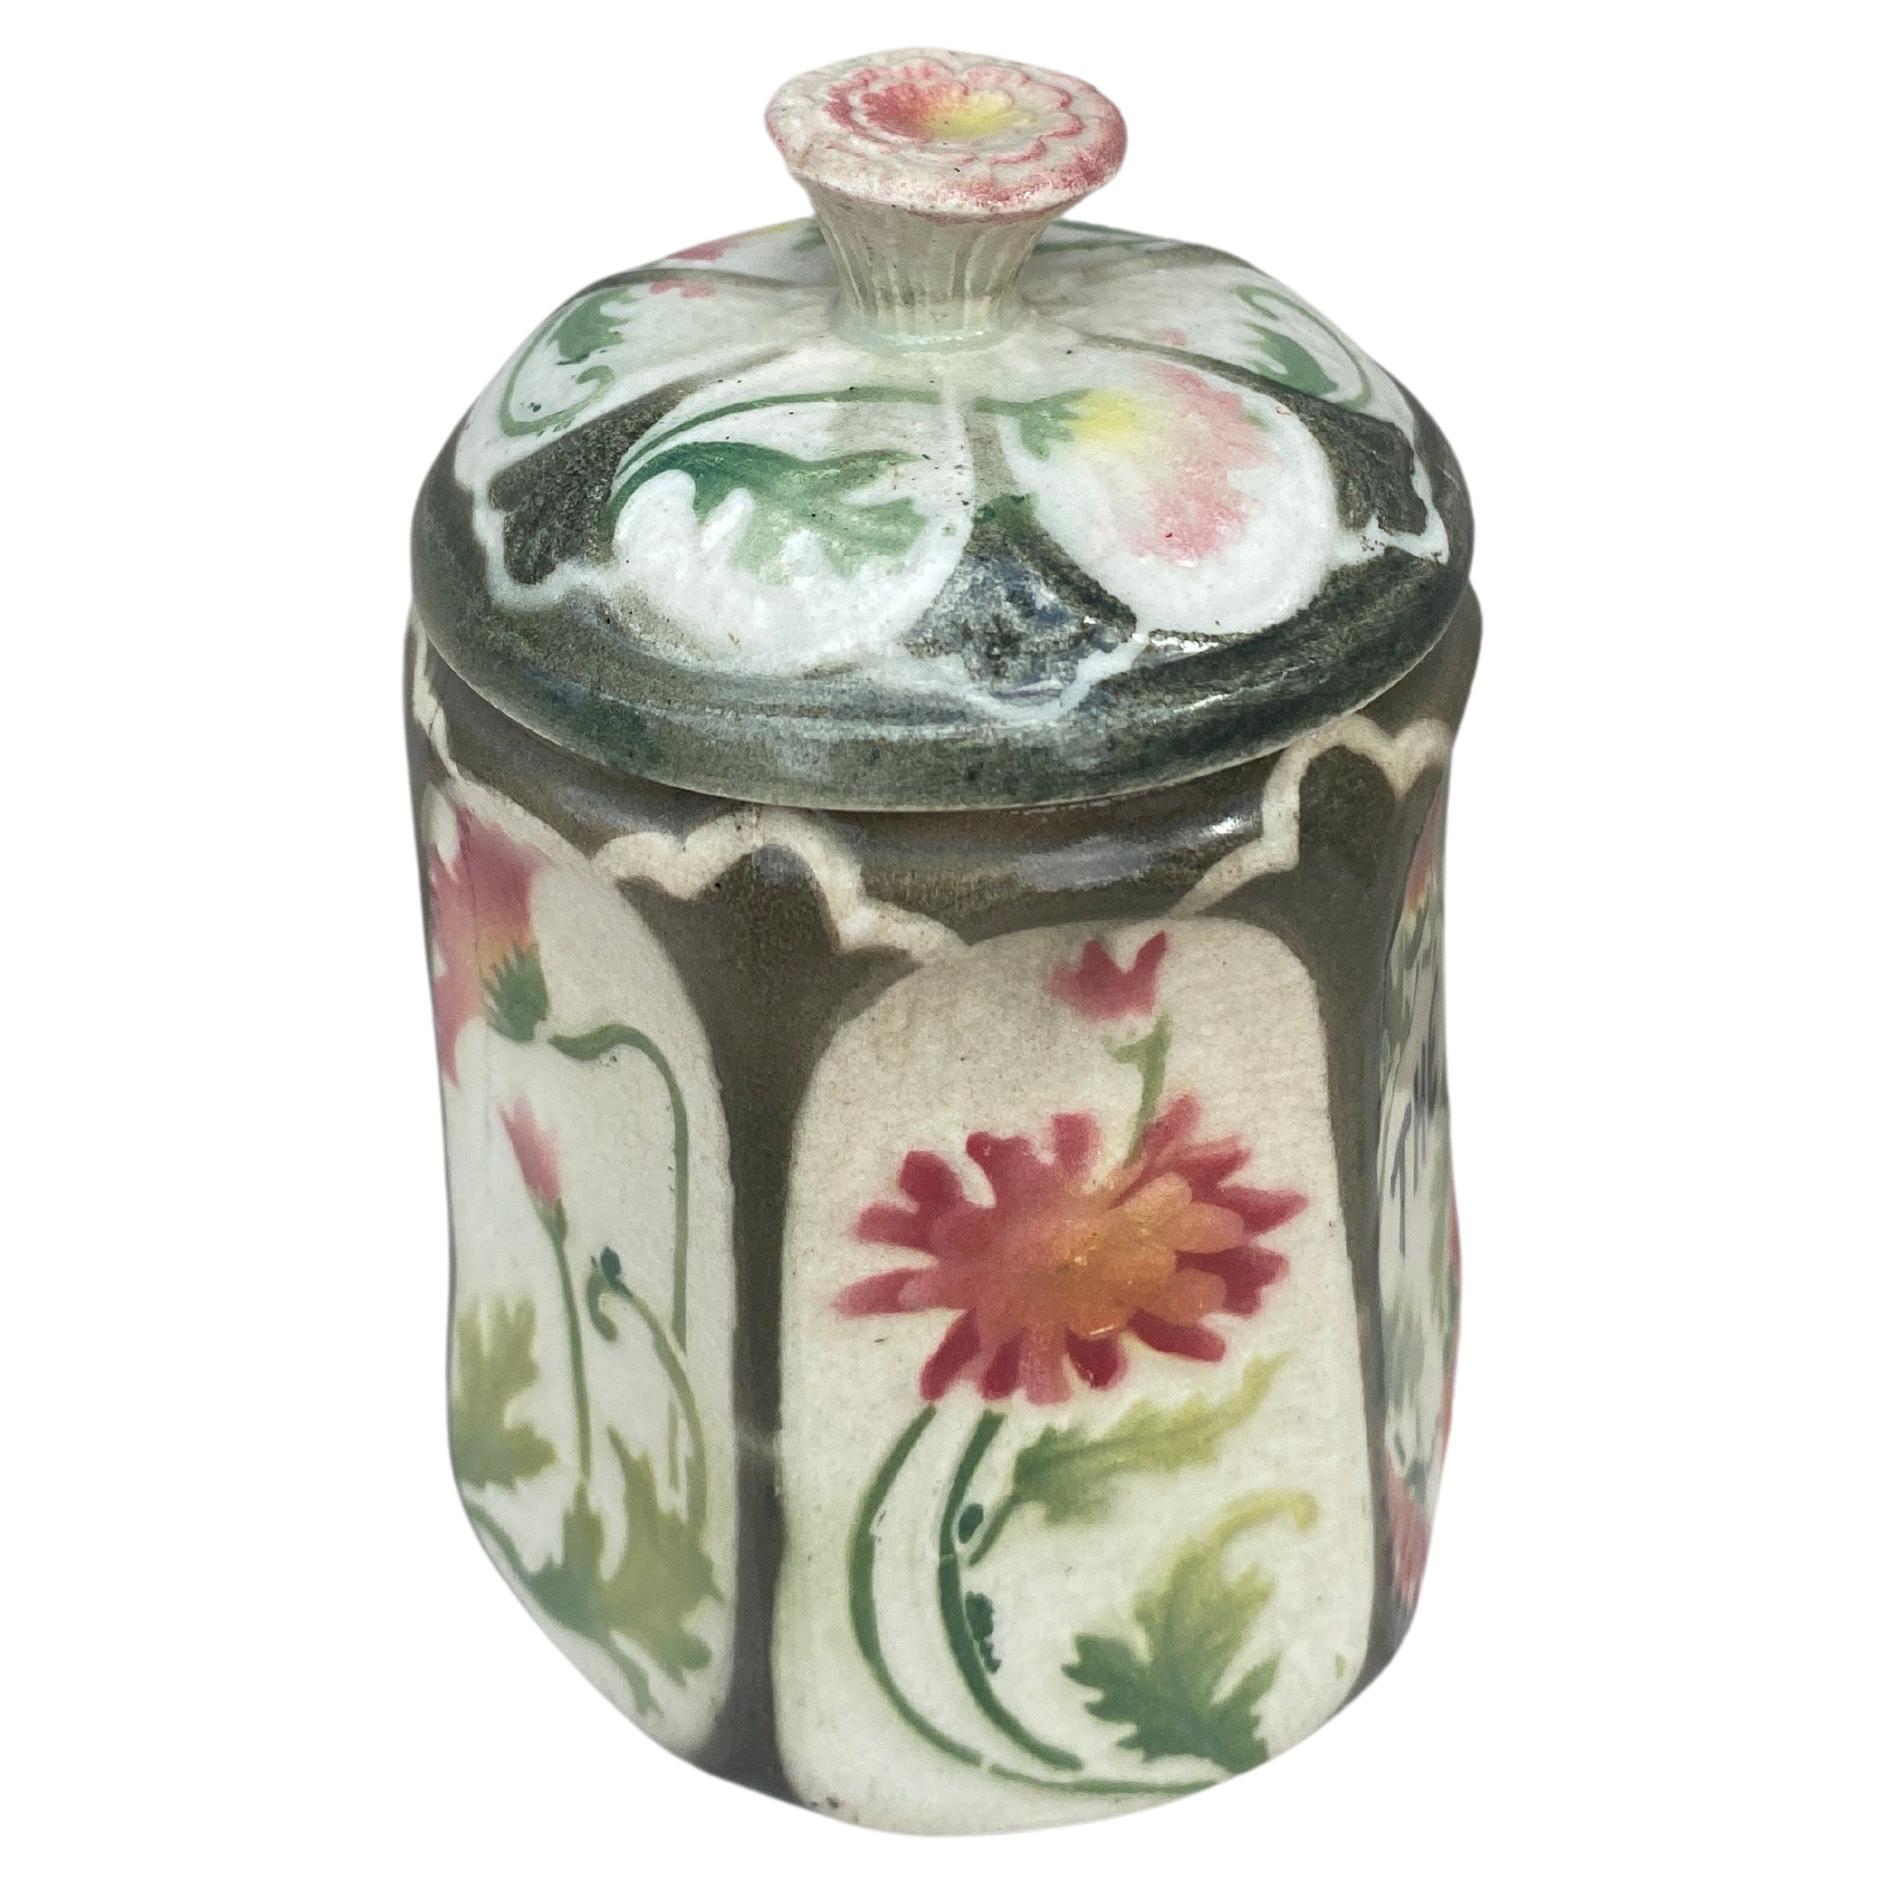 French Majolica Daisies Kitchen tea Canister signed Saint Clement Keller & Guerin Circa 1900.
H / 4.7 inches.
tea / The French.